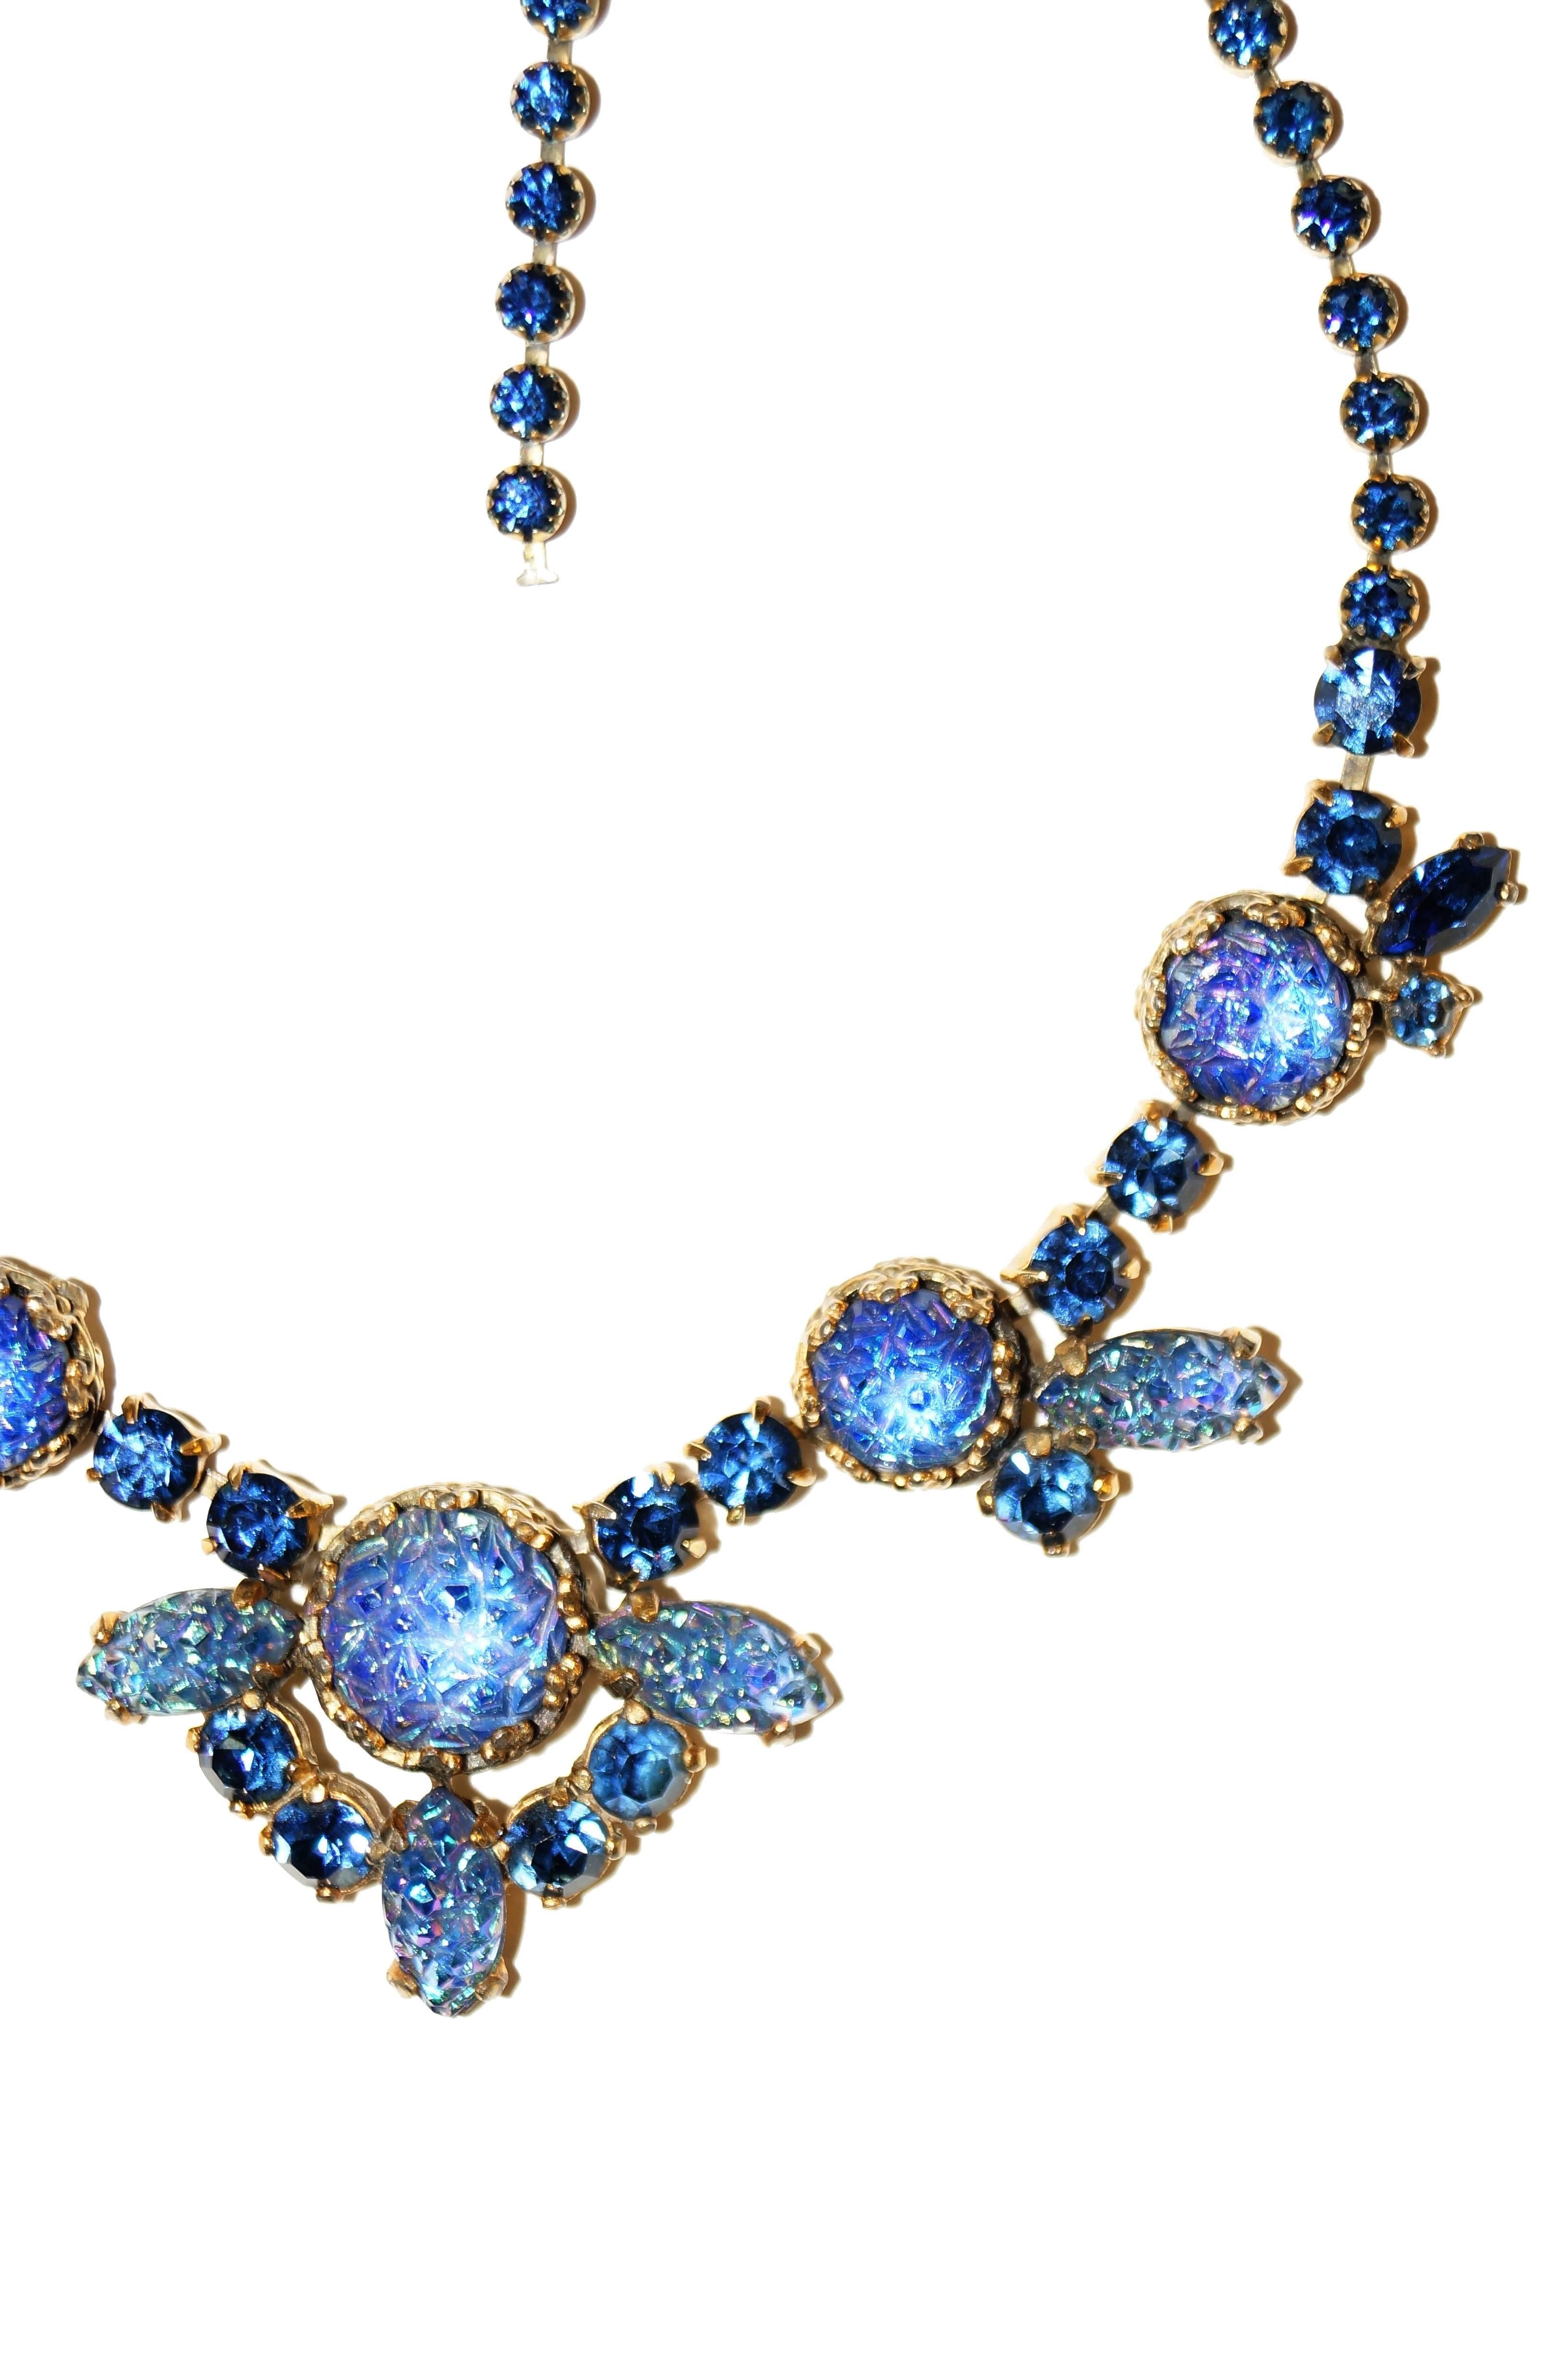 Beautiful vintage rhinestone and molded art glass necklace by Elsa Schiaparelli. The necklace features amazing iridescent icy blue “lava rock” cabochons and marquise cut and round multifaceted rhinestones. The piece has a large lava rock center